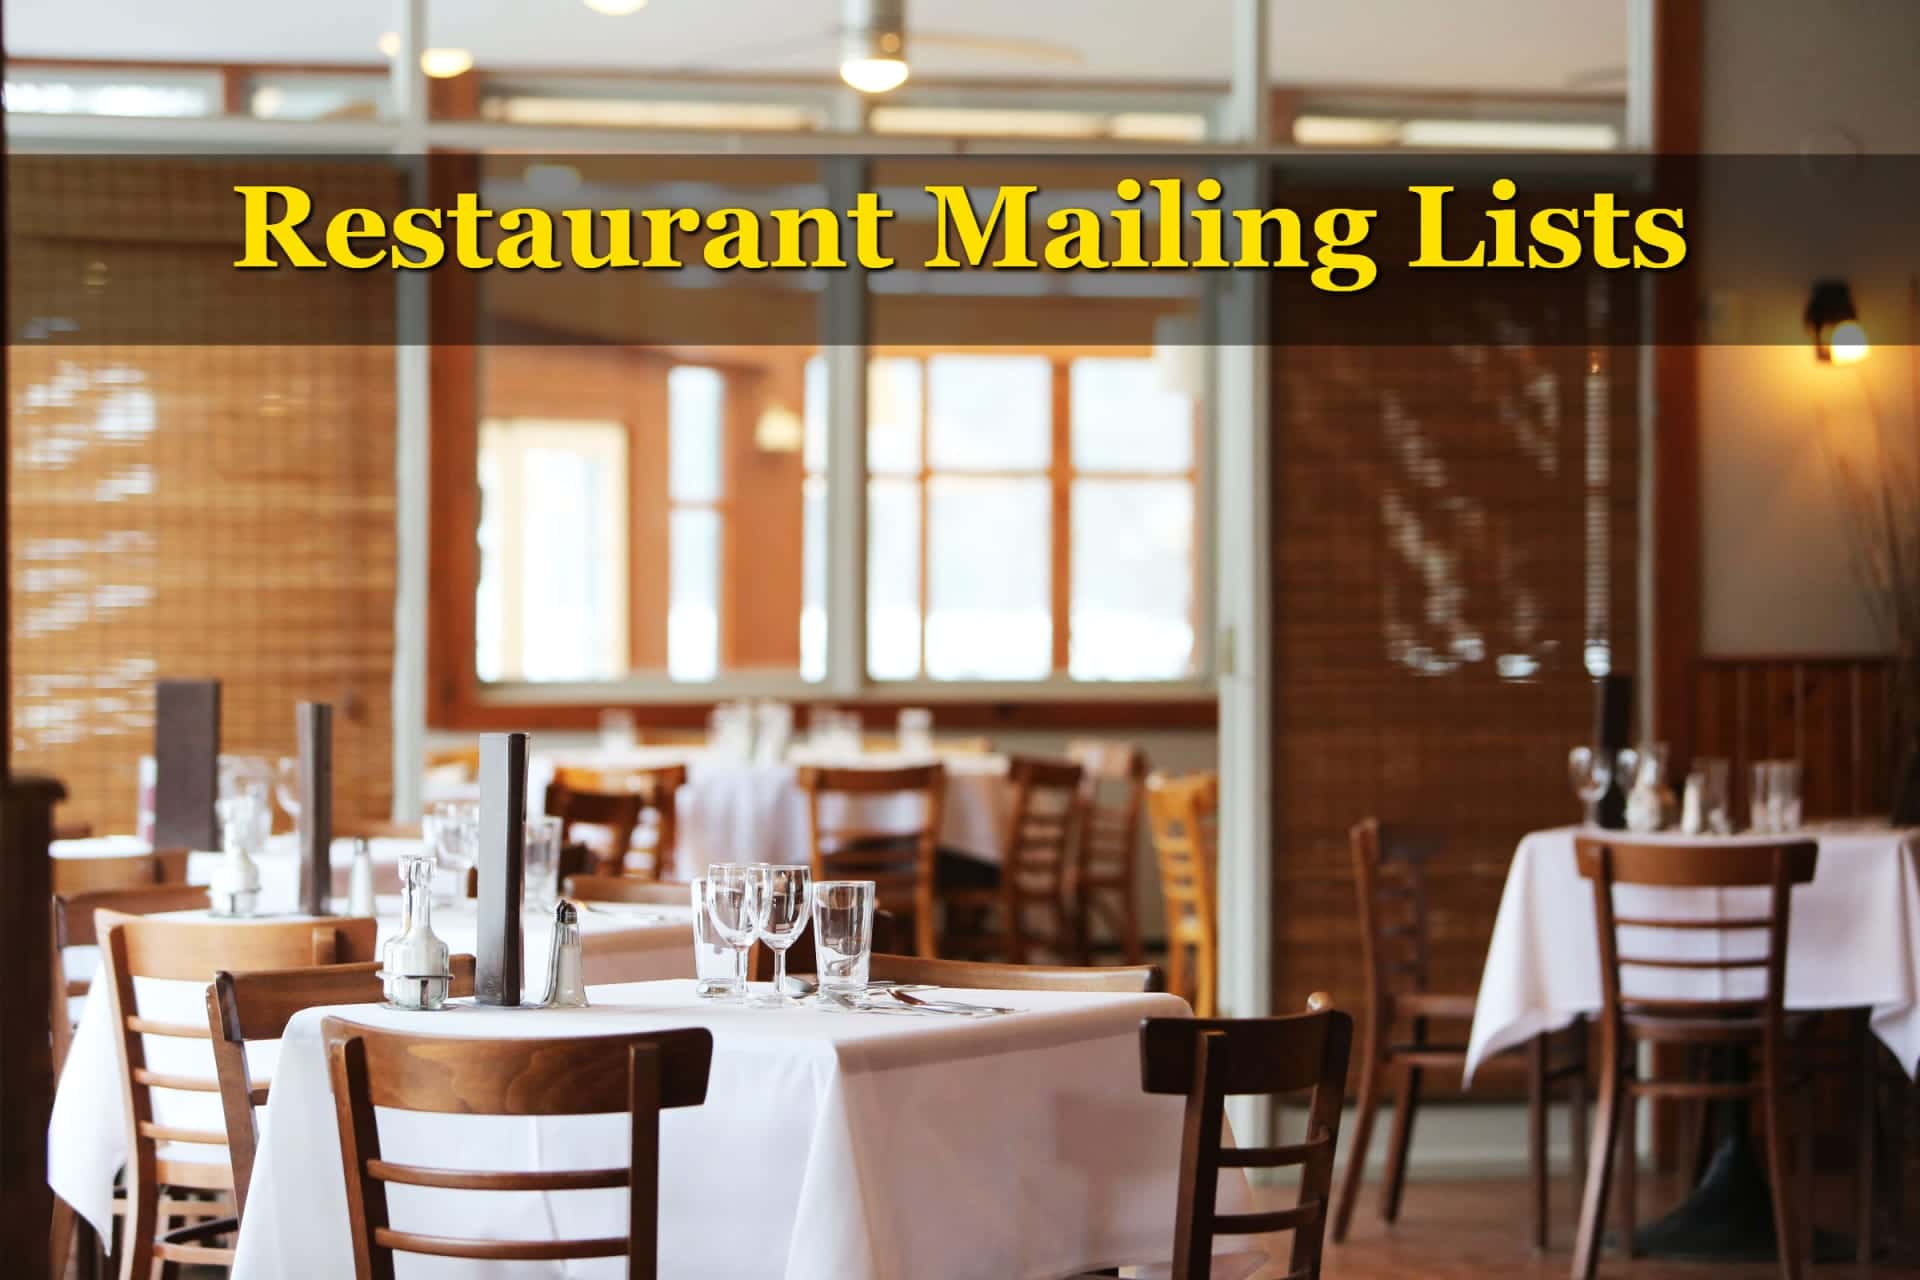 An empty restaurant in need of marketing with restaurant mailing lists